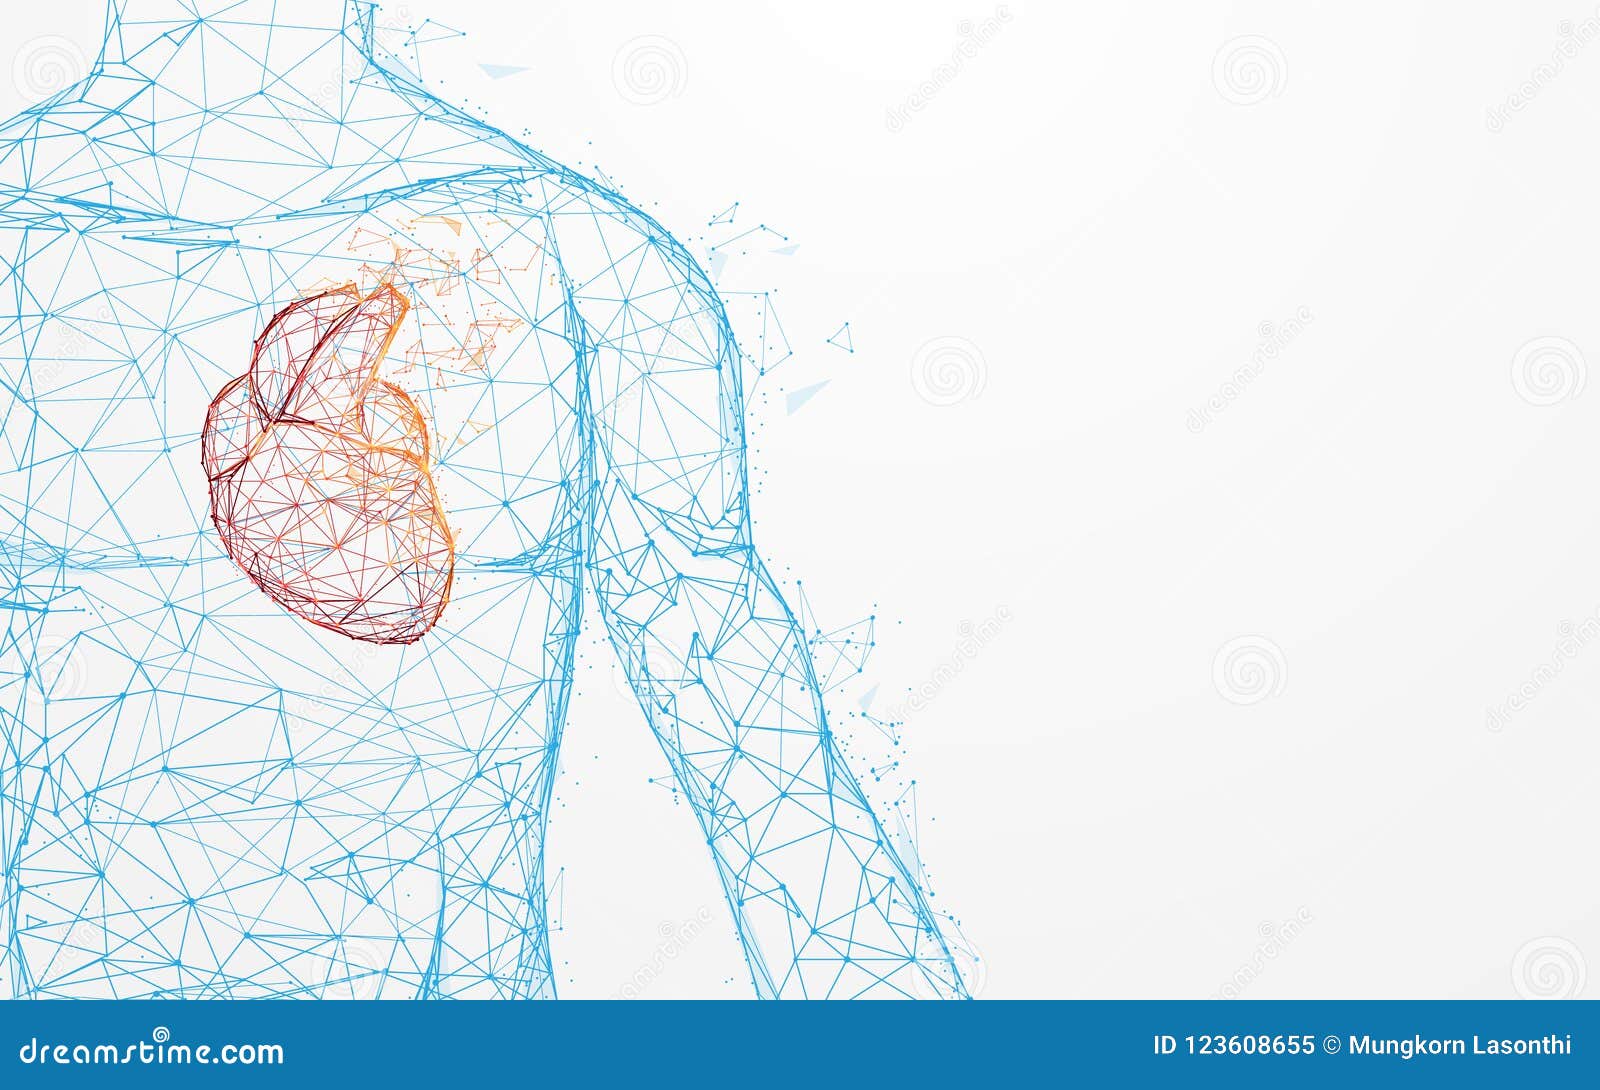 human heart anatomy form lines and triangles, point connecting network on blue background